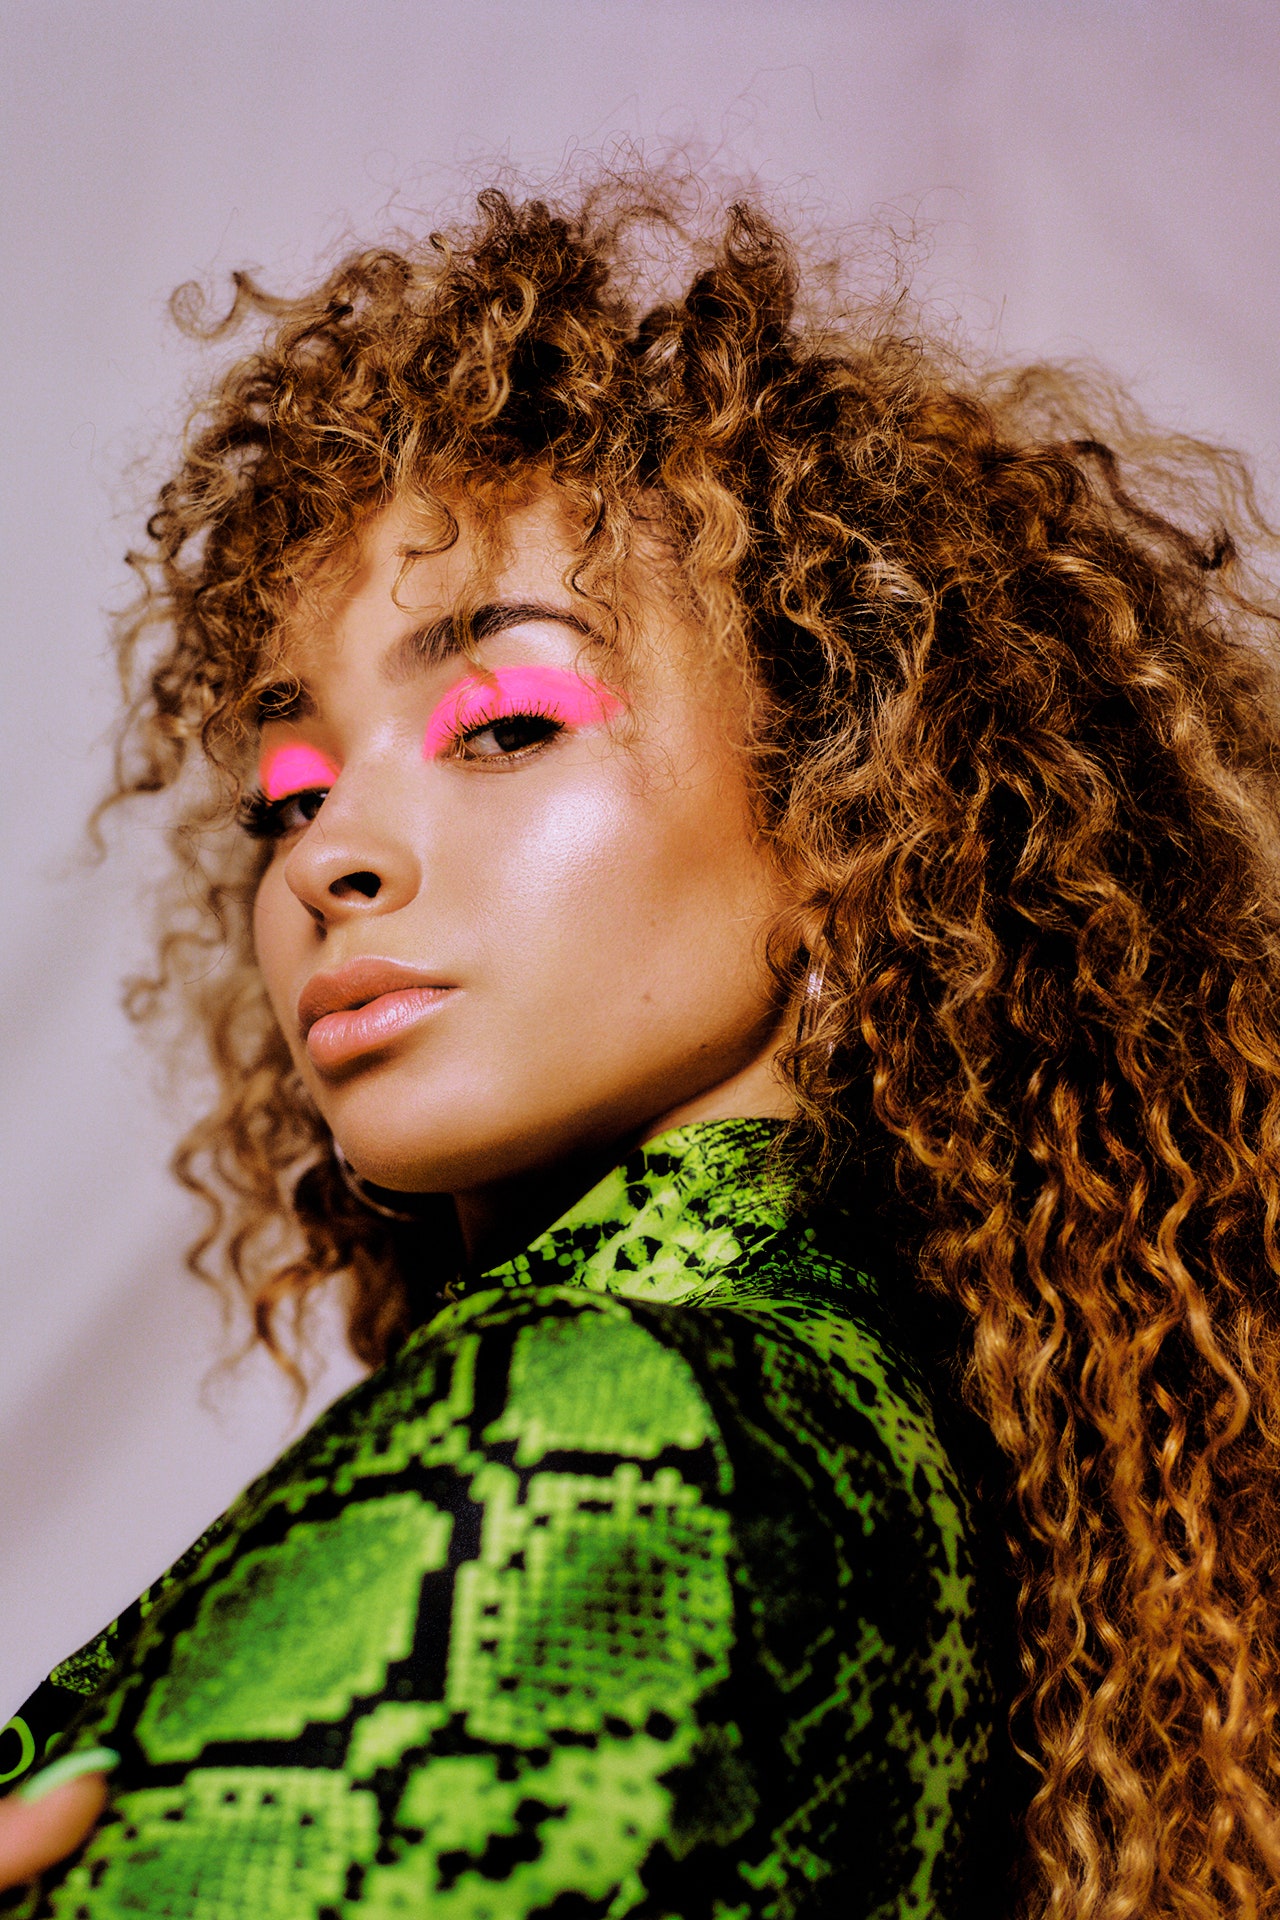 Ella Eyre Interview: 'My Team Was Male Heavy And Lacking In Diversity'